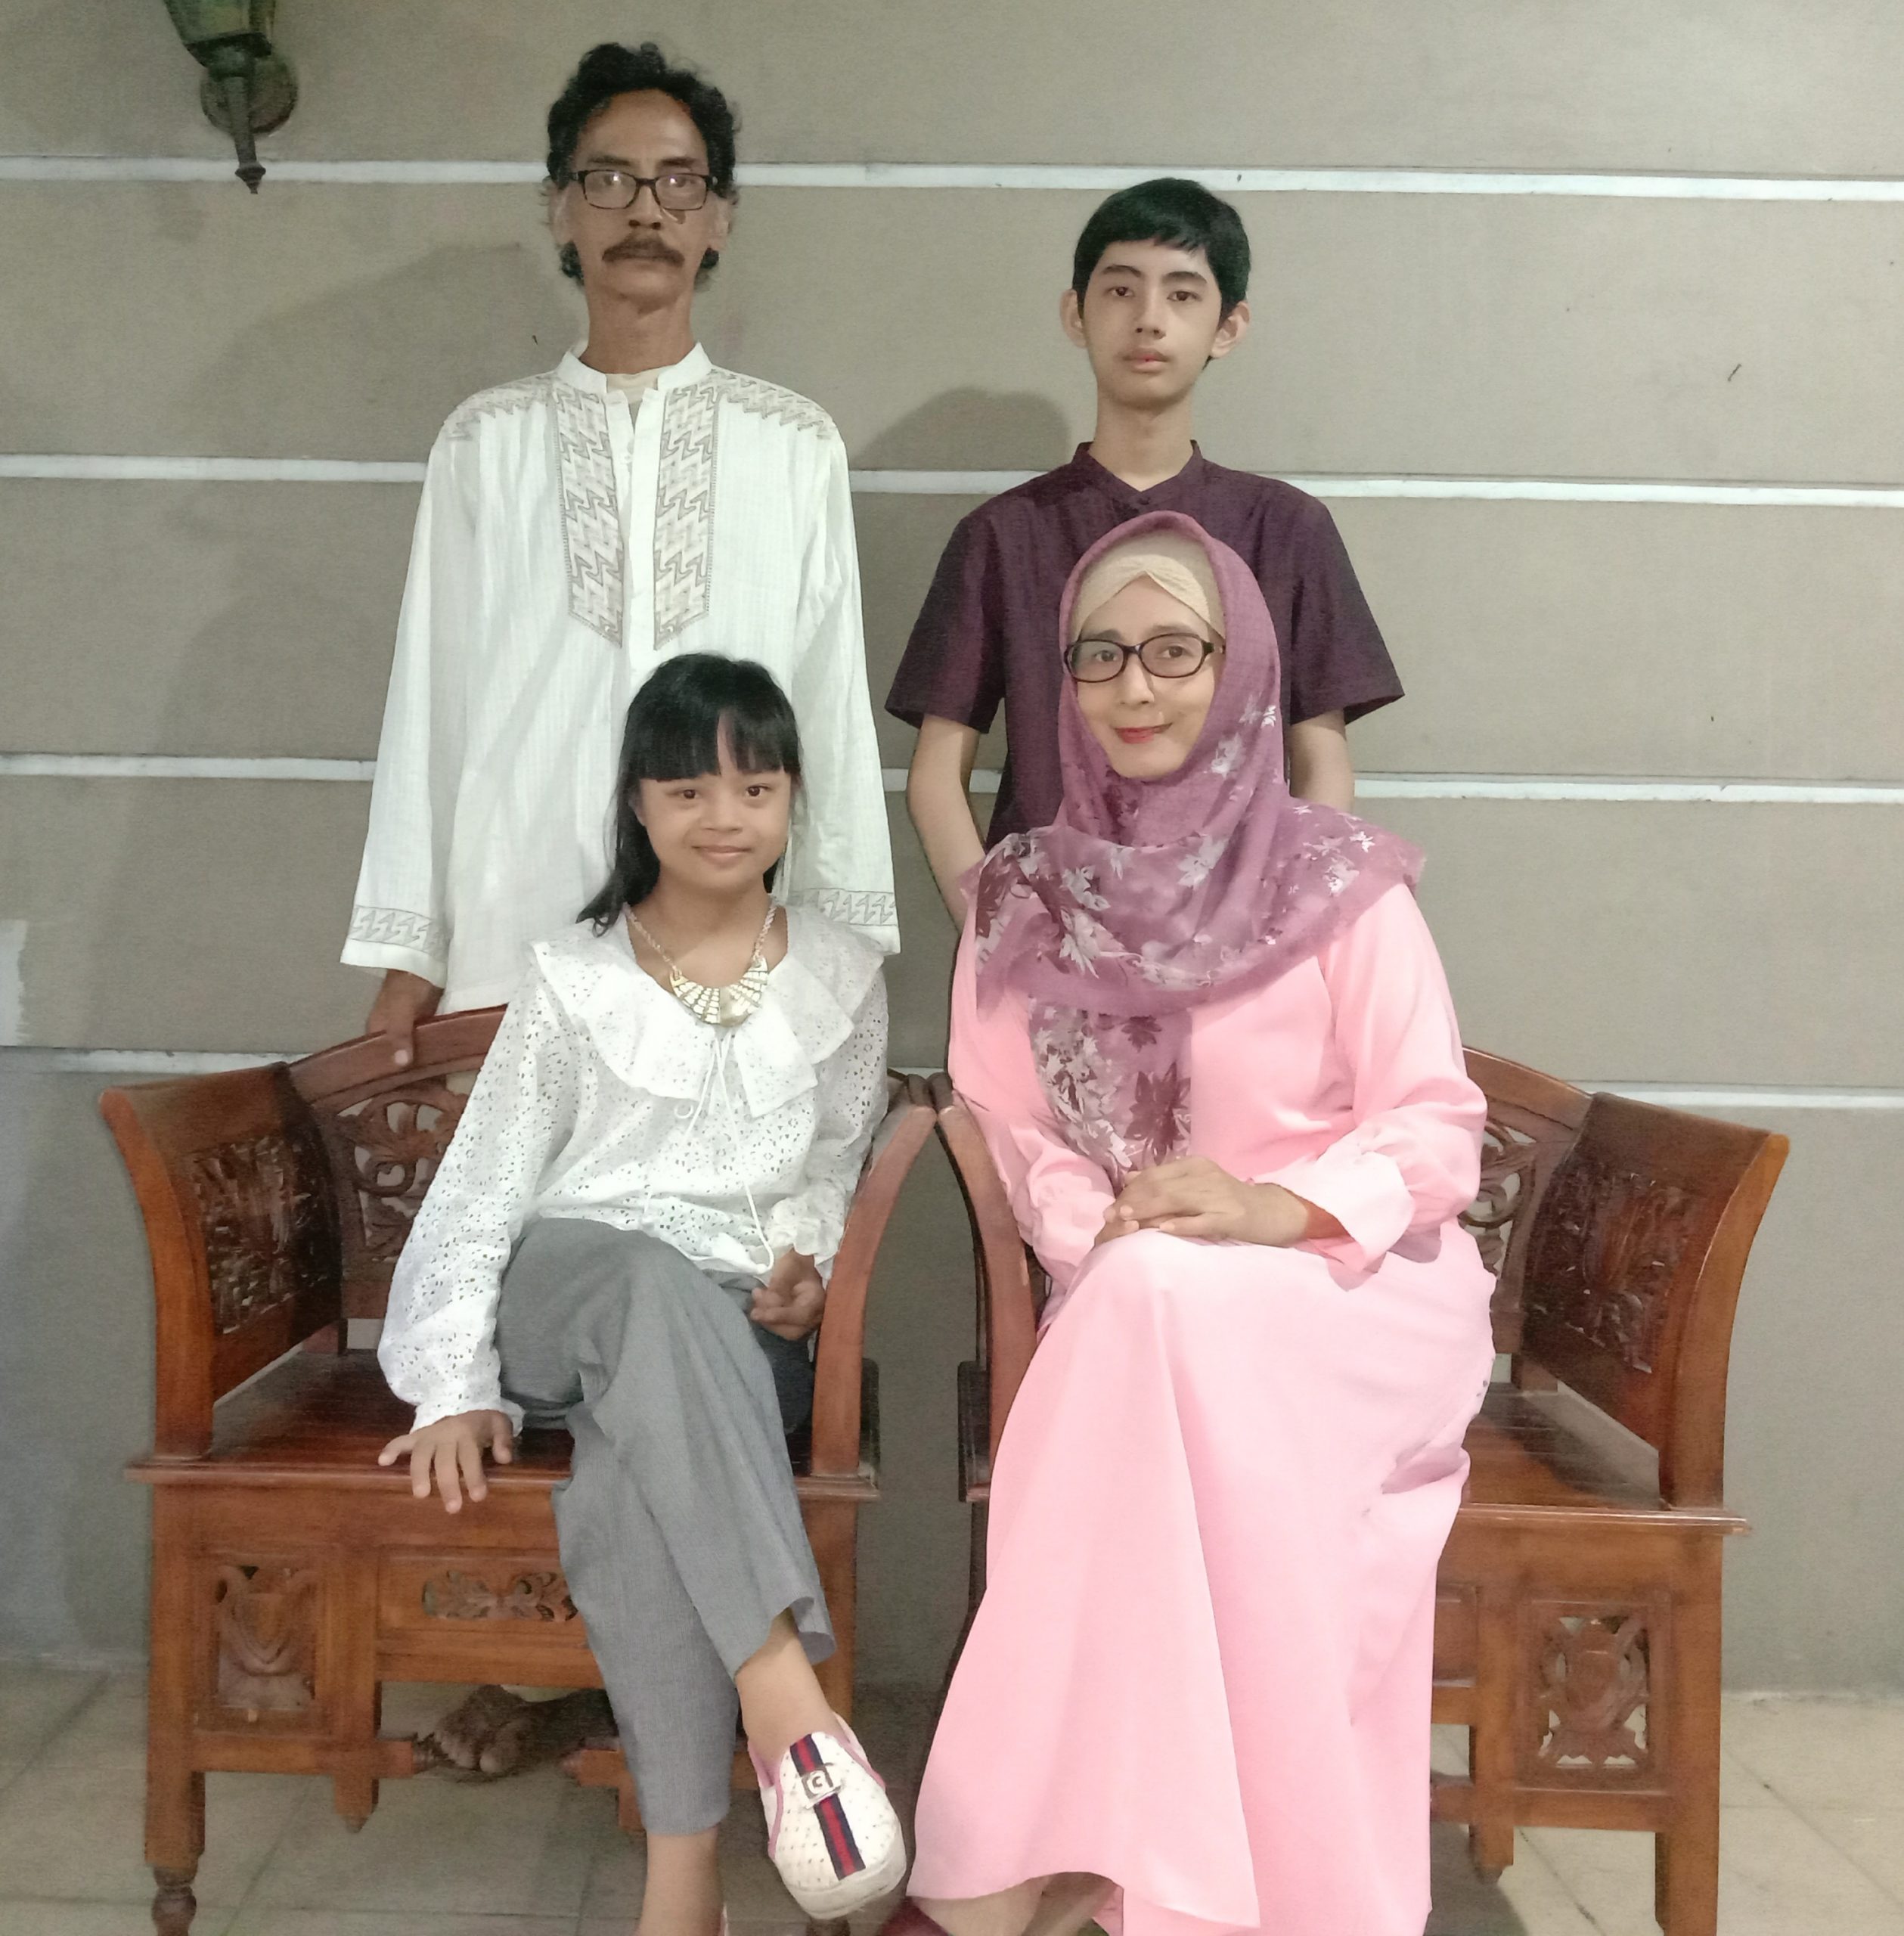 Rei with her family